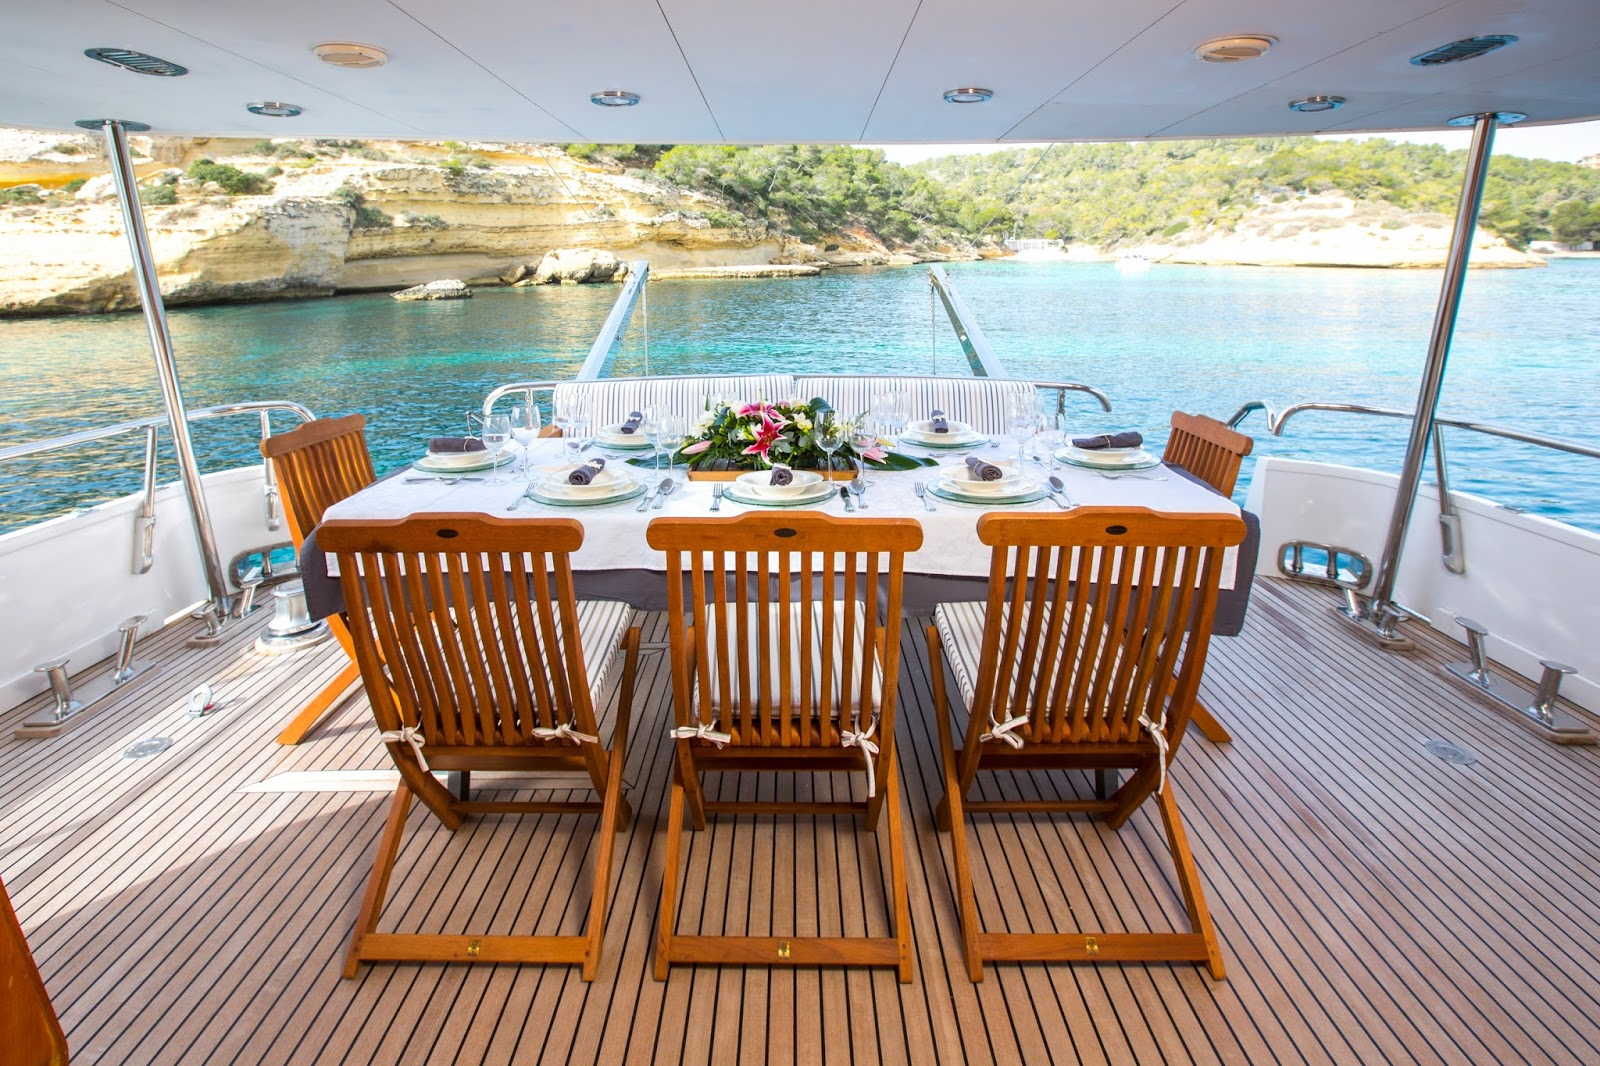 ACE SIX Charter Yacht 6 Aft deck dining